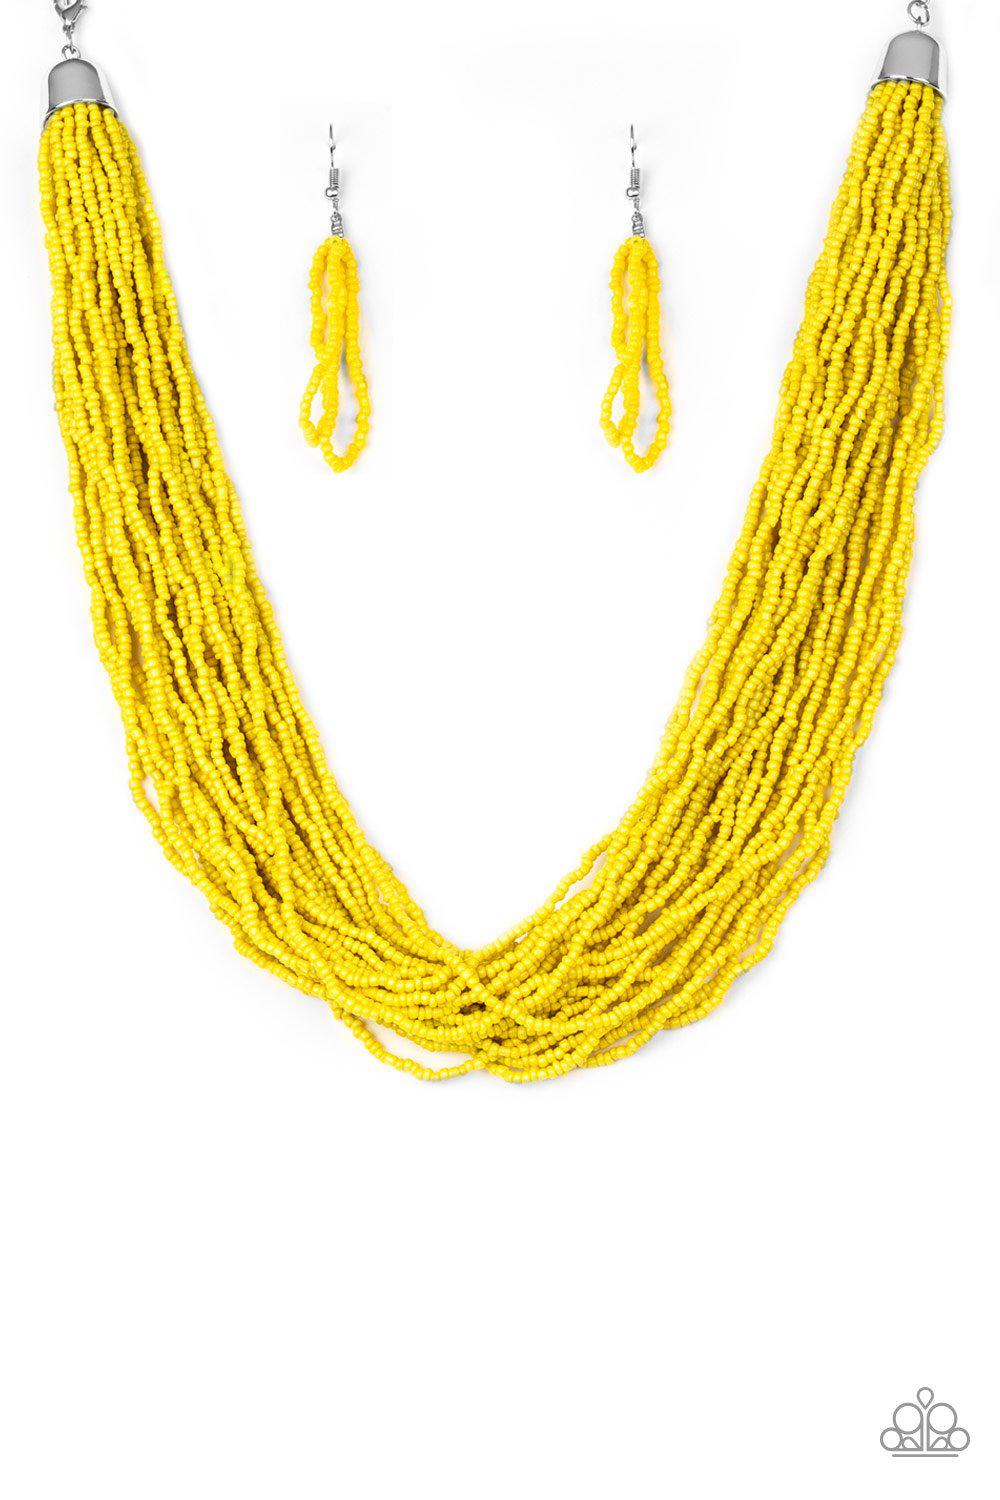 The Show Must Congo On Yellow Seed Bead Necklace and matching Earrings - Paparazzi Accessories-CarasShop.com - $5 Jewelry by Cara Jewels